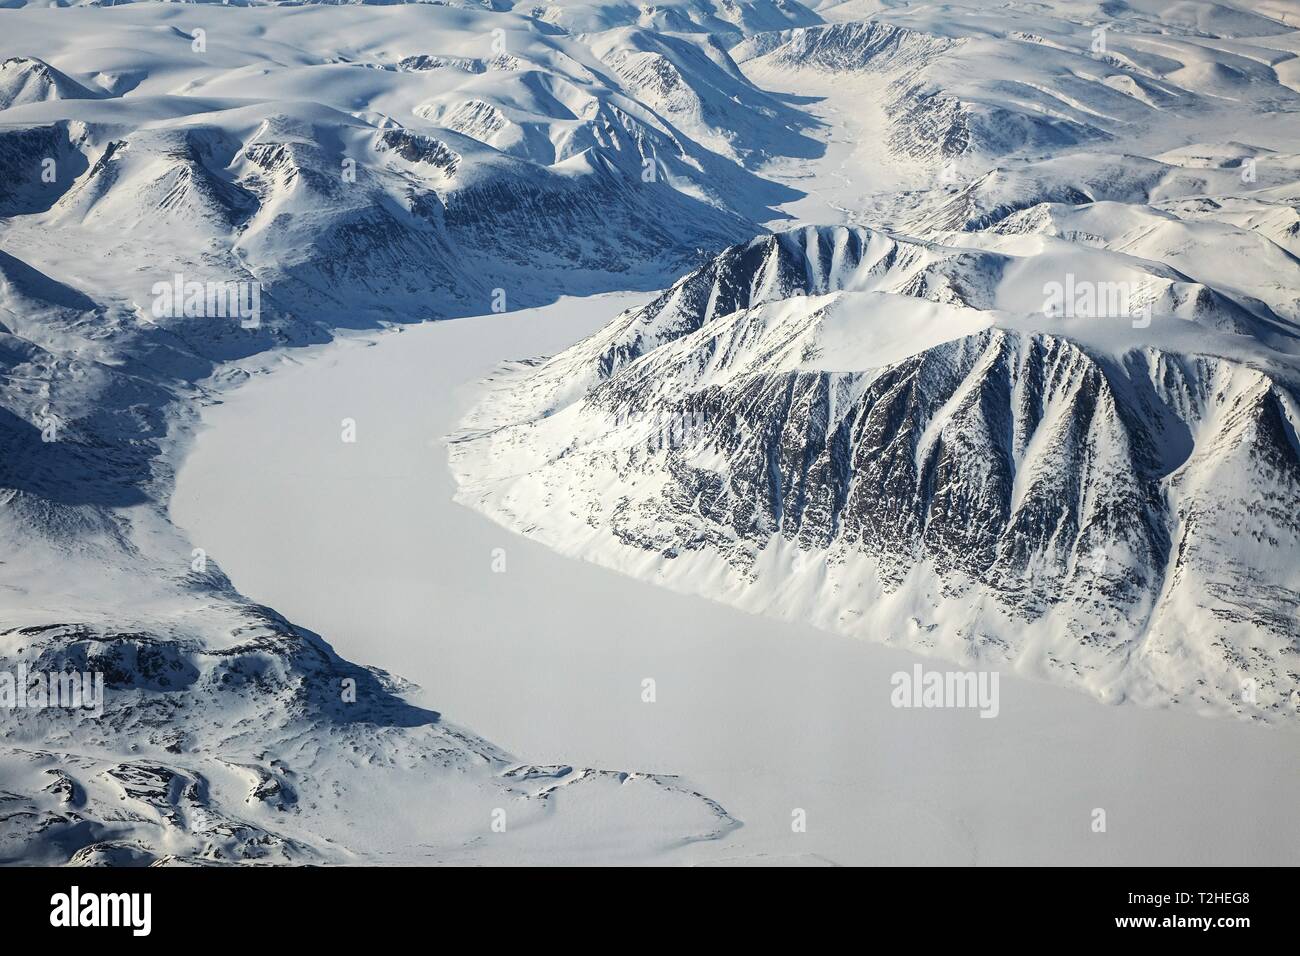 Arctic landscape, snow-covered mountain landscape with glacier, King Christian X Land, Greenland Stock Photo